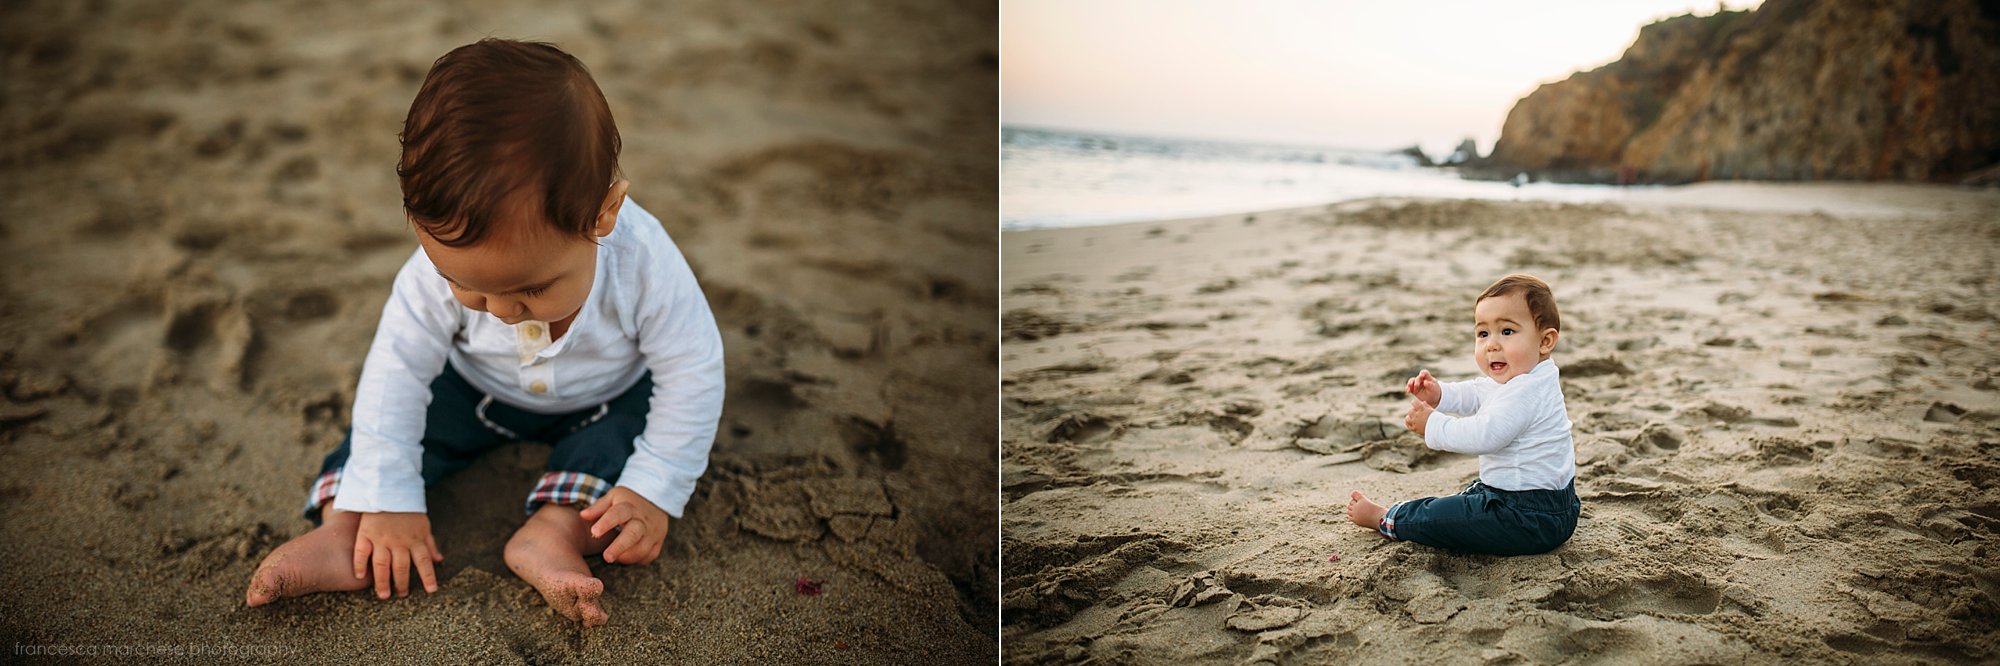 Family of three with small baby family photography session at the beach  - Francesca Marchese Photography Los Angeles & Orange County family photographer